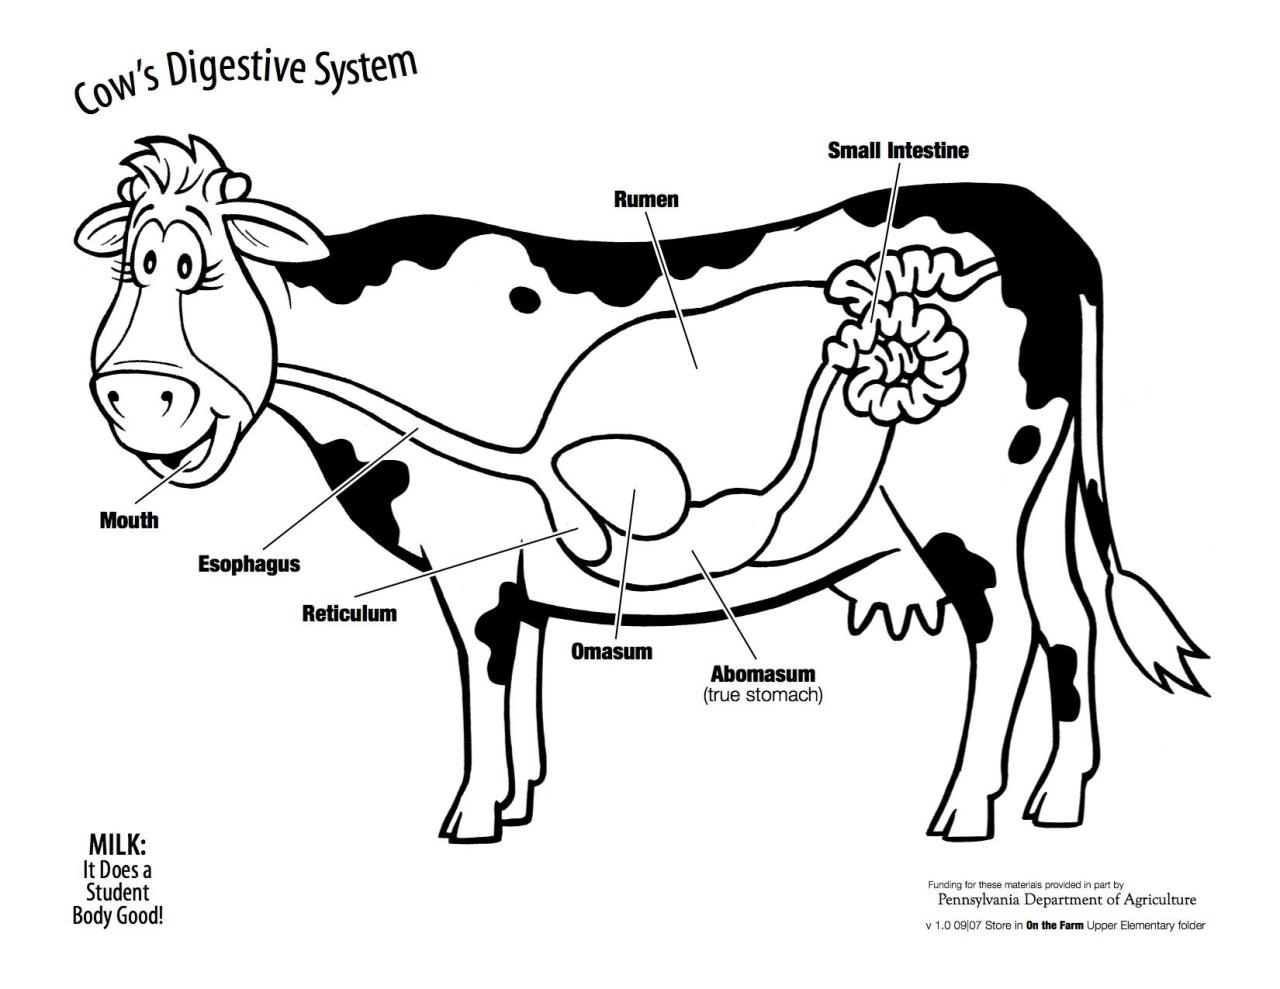 Draw and Label Digestive System of Cow: Anatomy Guide for Drawing Cow's Digestive System